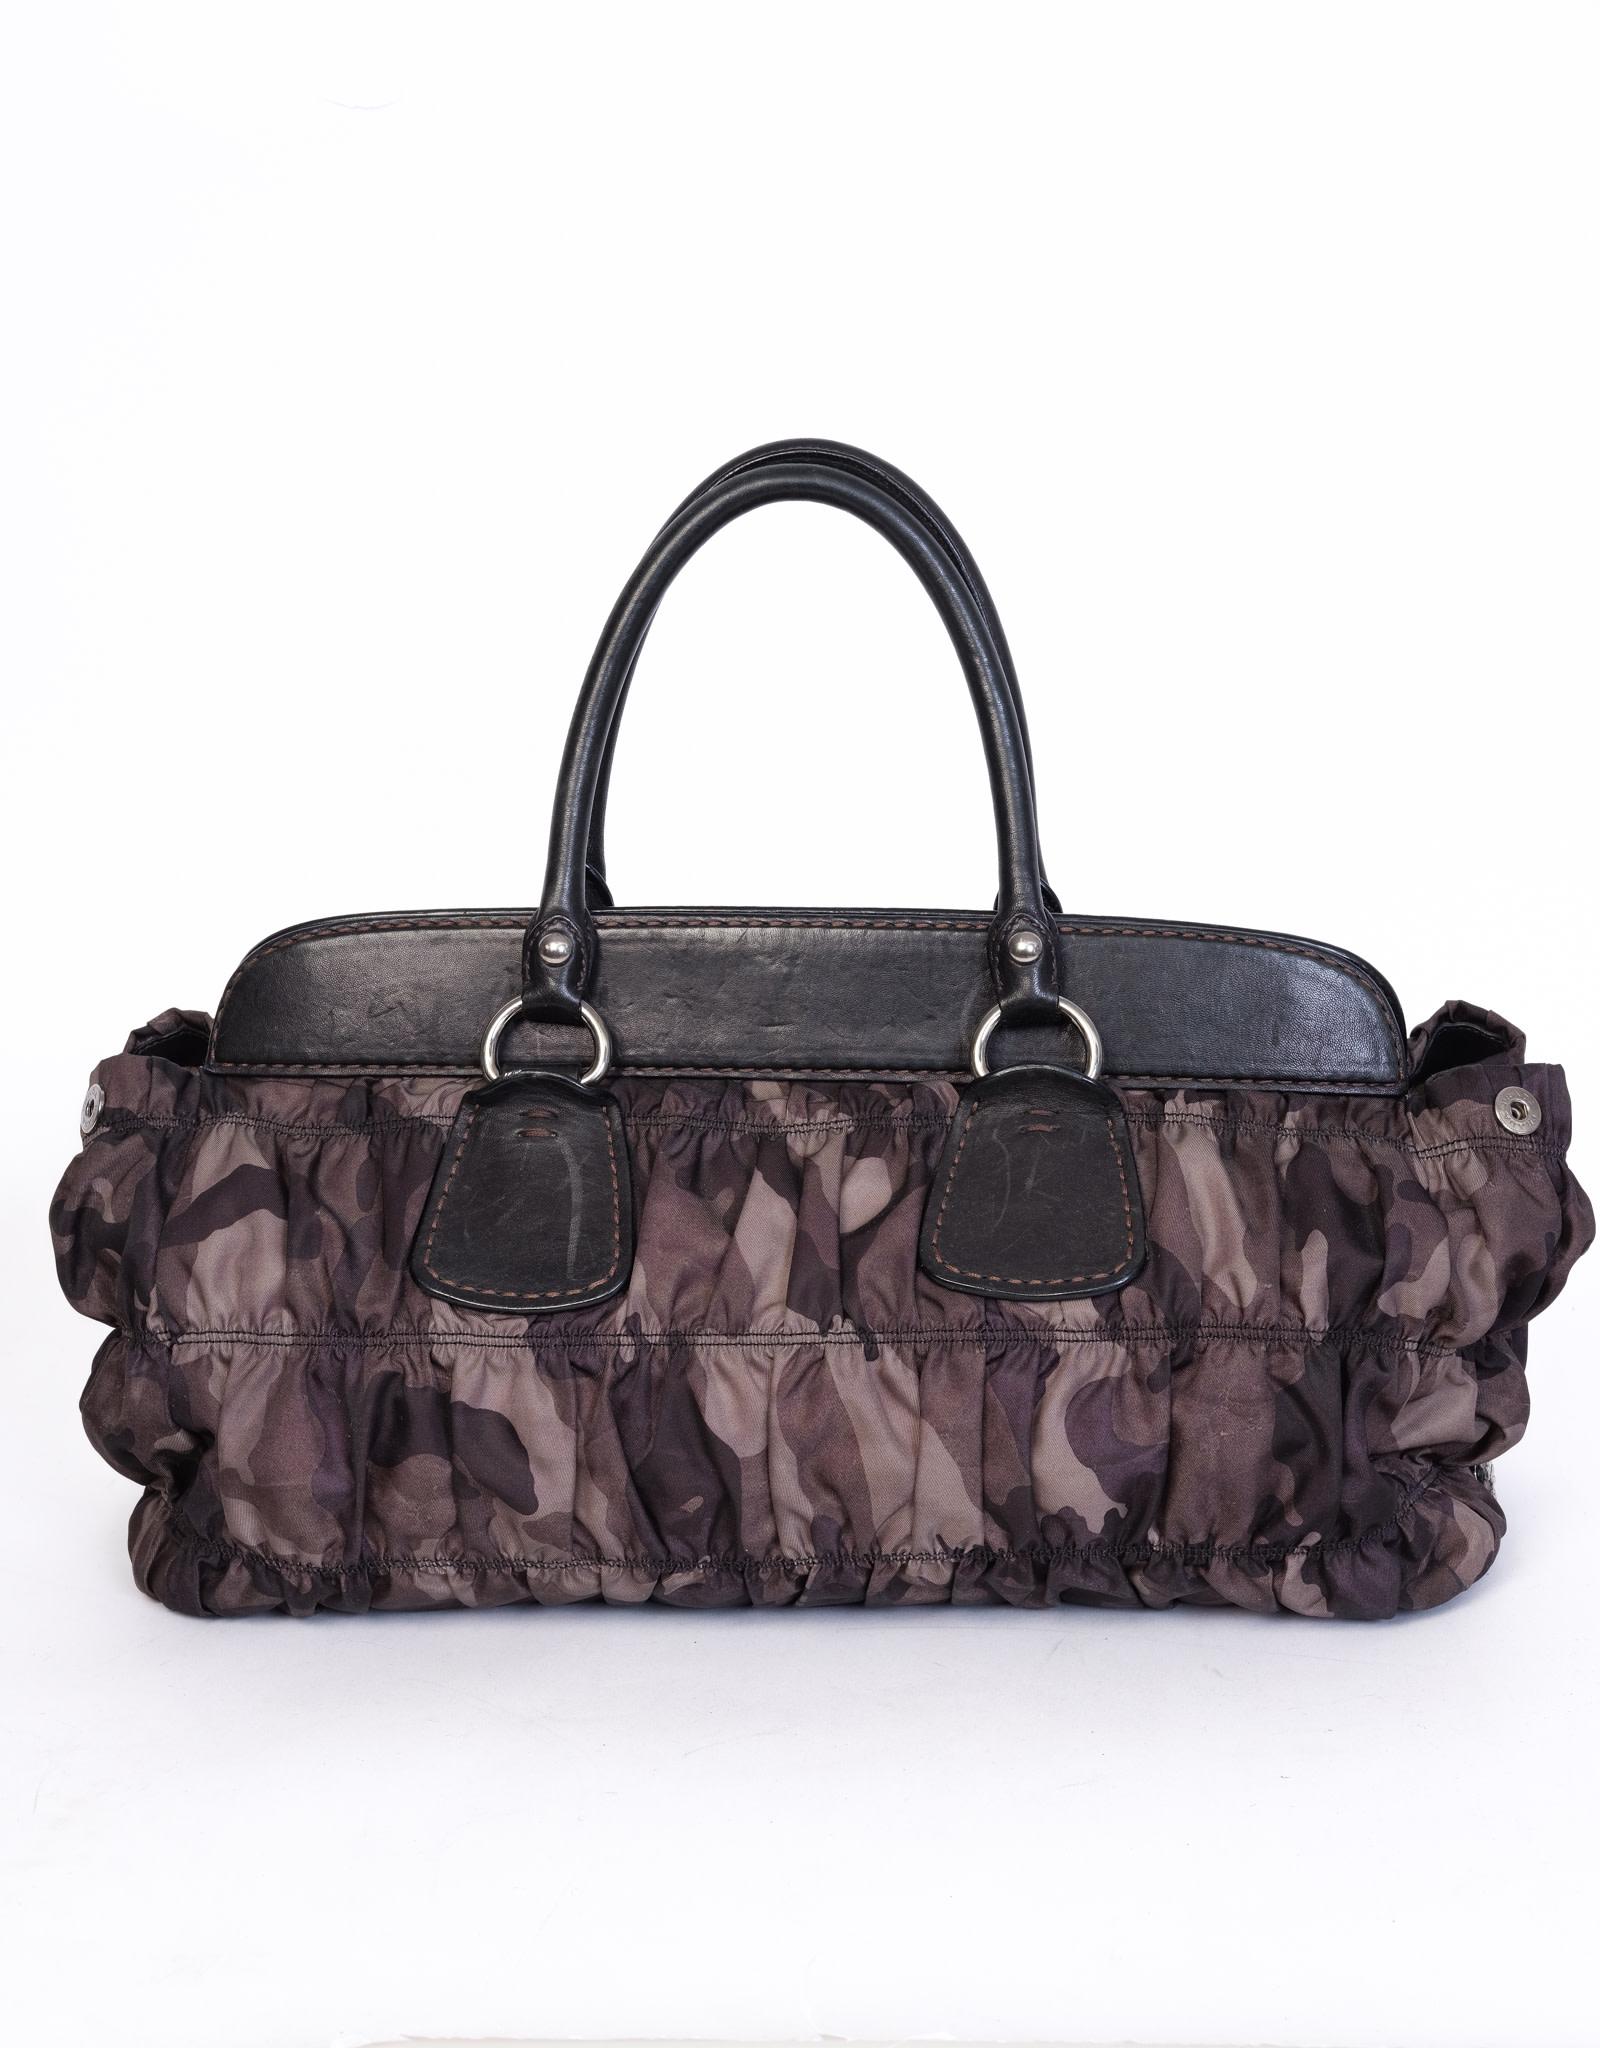 This camo Gaufre Prada bag features leather trim, silver tone hardware, single interior wall pocket with zip closure, interior patch pockets and top magnetic snap closure.  

COLOR: Camo
MATERIAL: Nylon/ Leather
ITEM CODE: 7
MEASURES: H 10” x L 17”